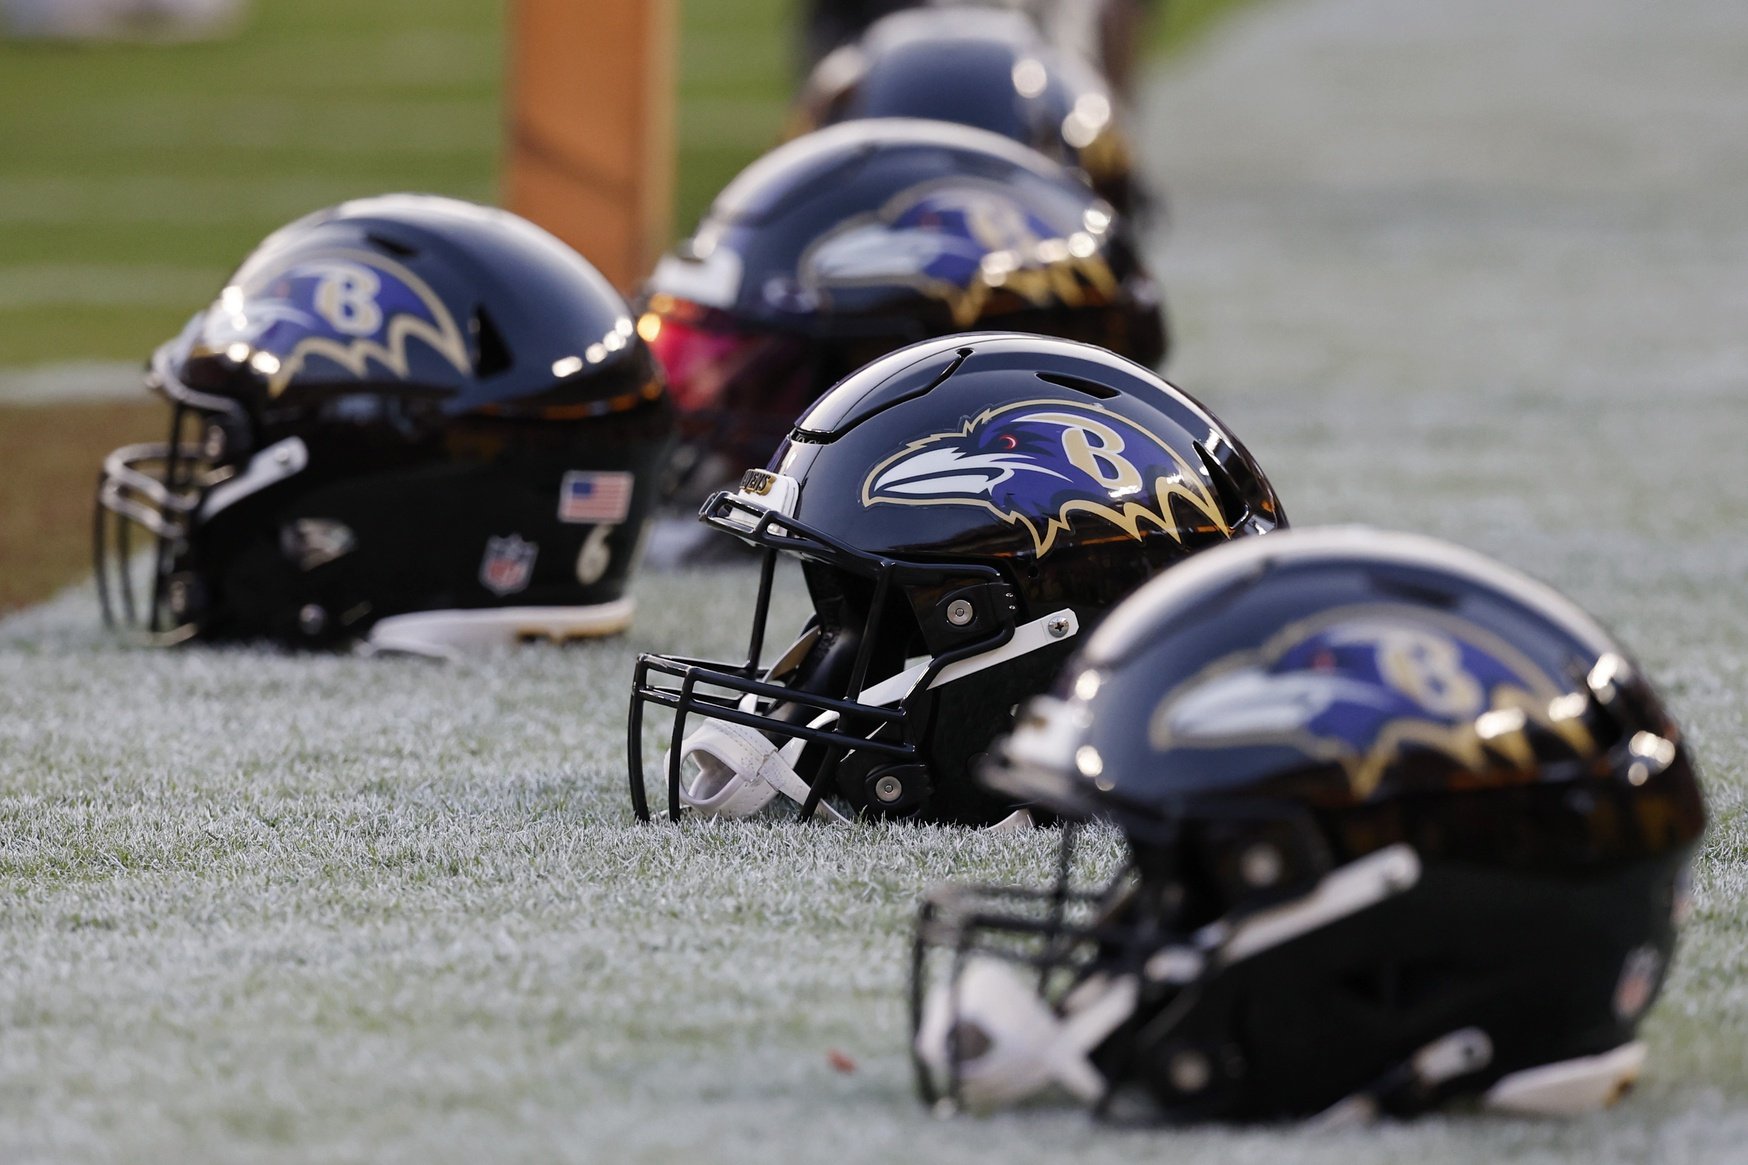 Several Baltimore Ravens helmets on the sidelines during a game.